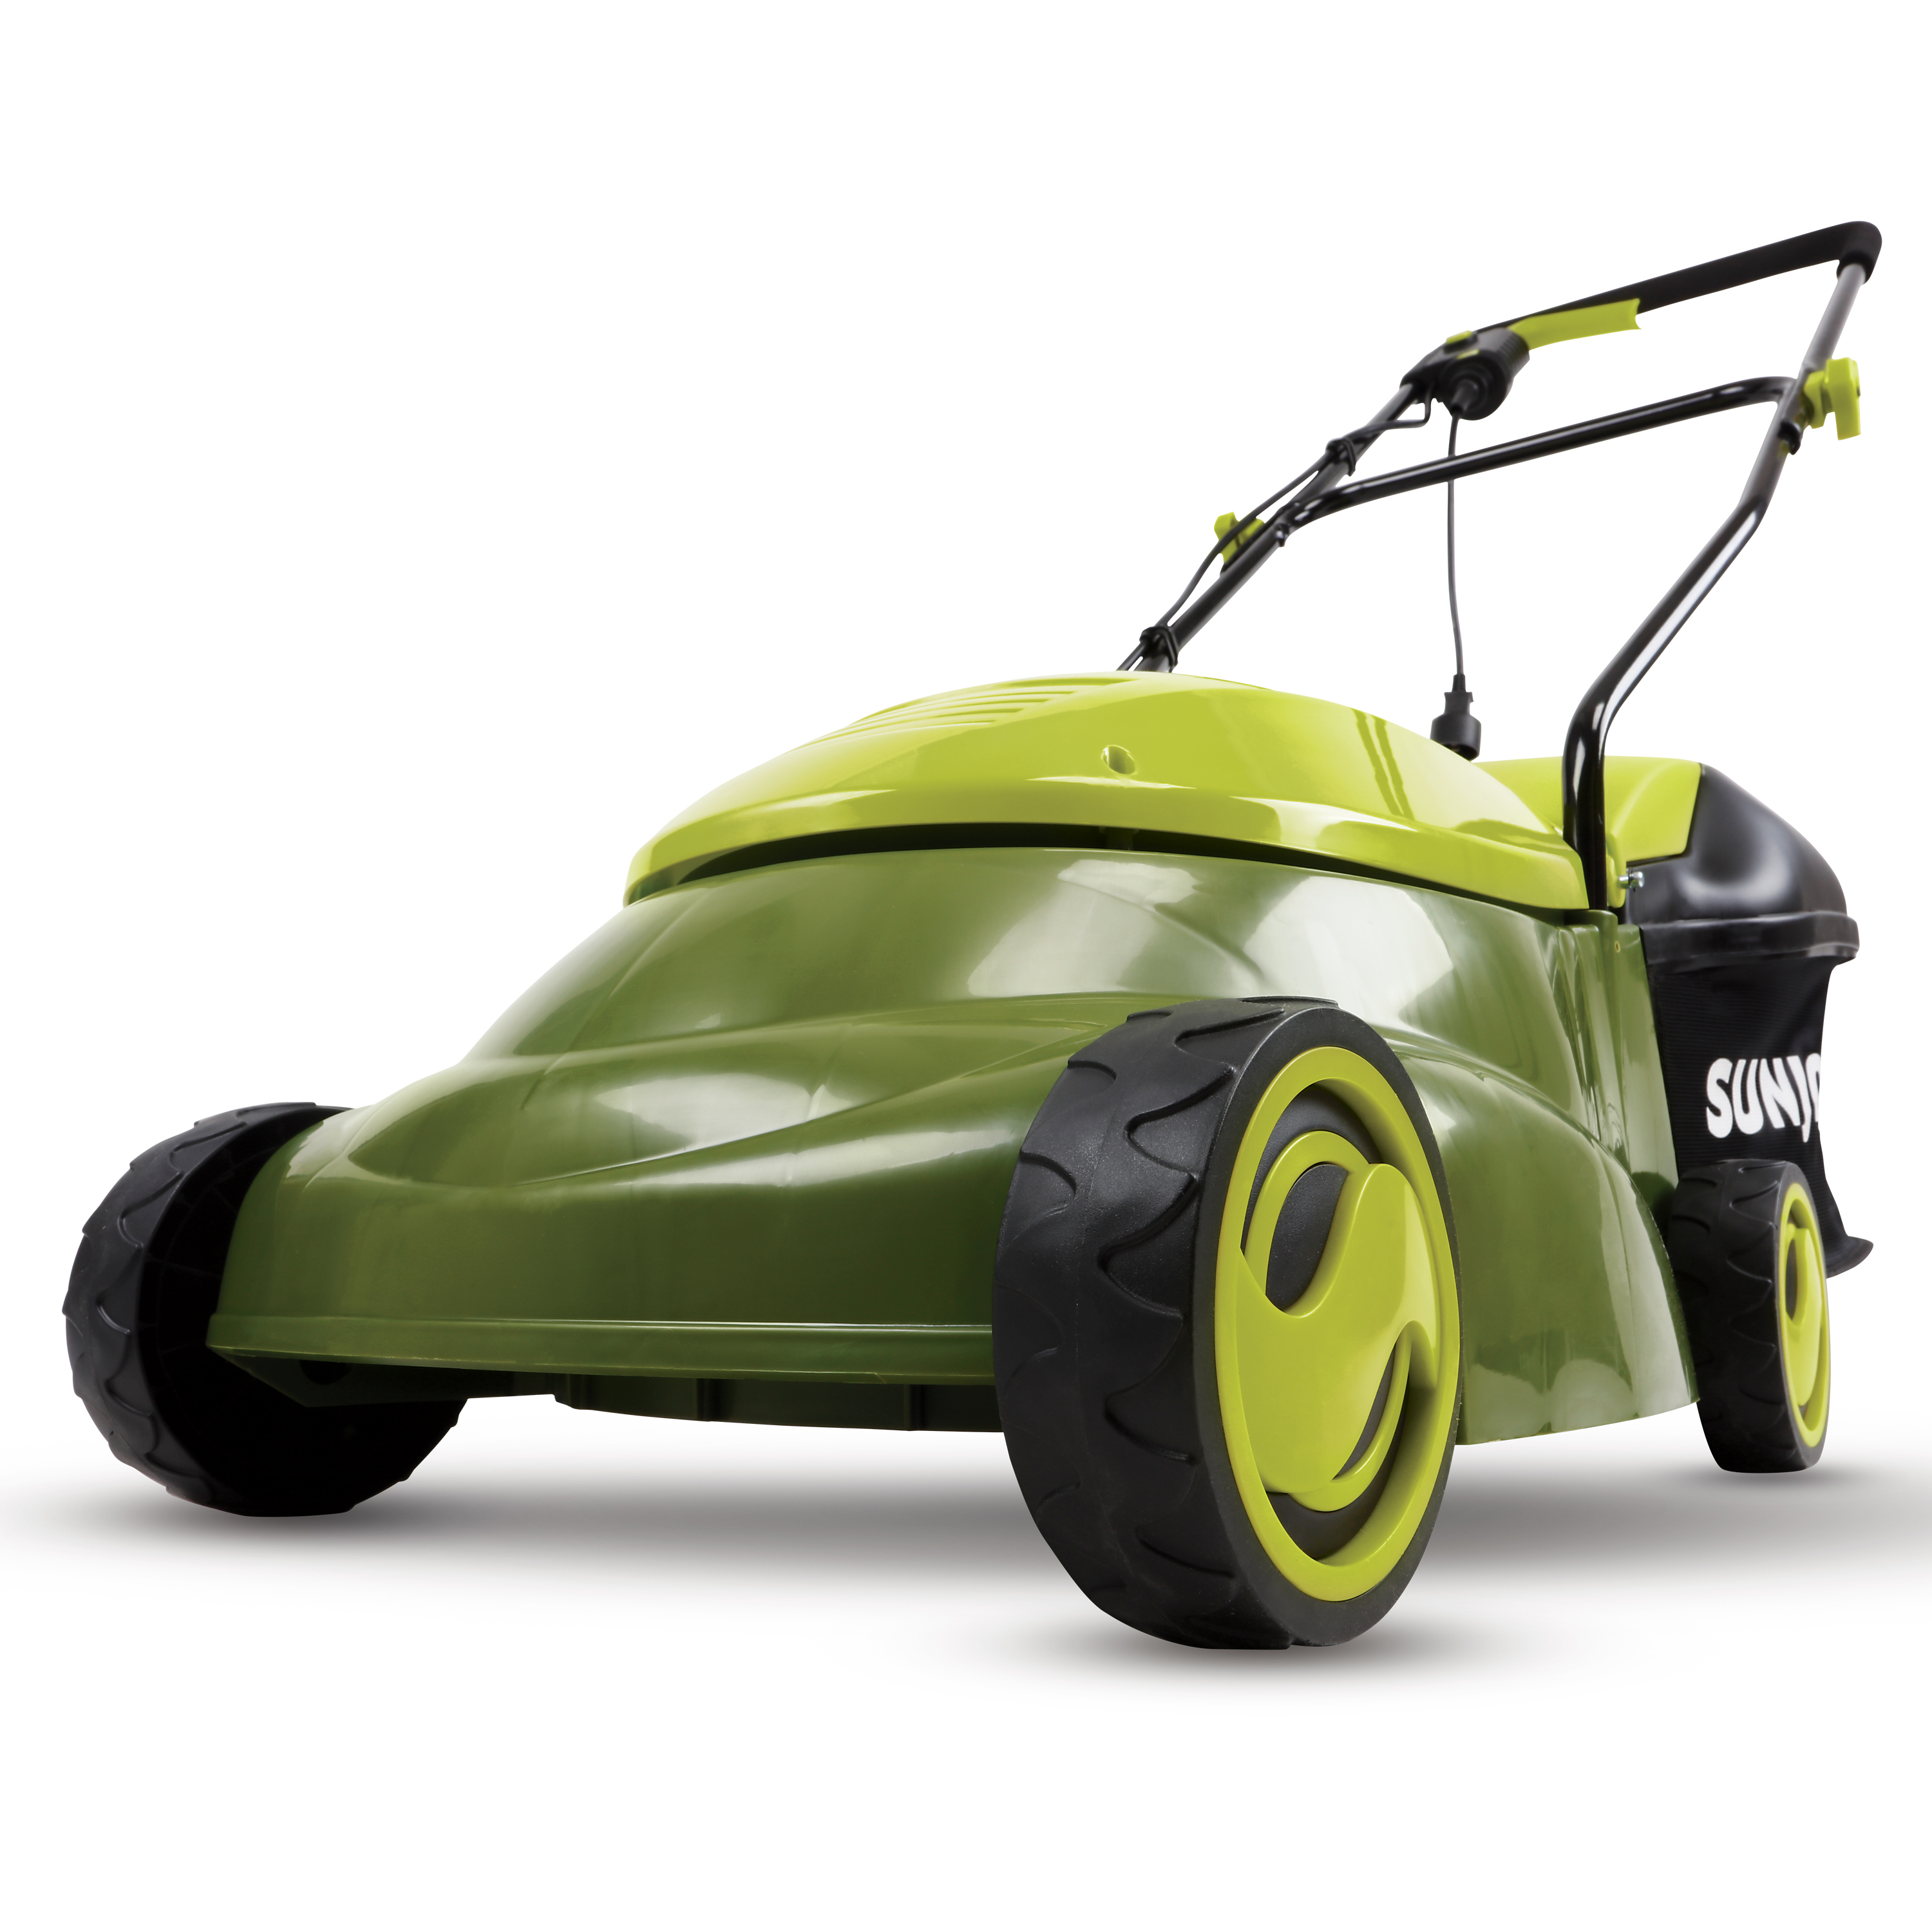 Grass guzzlers: Homeowners look at lawnmowers in whole new light